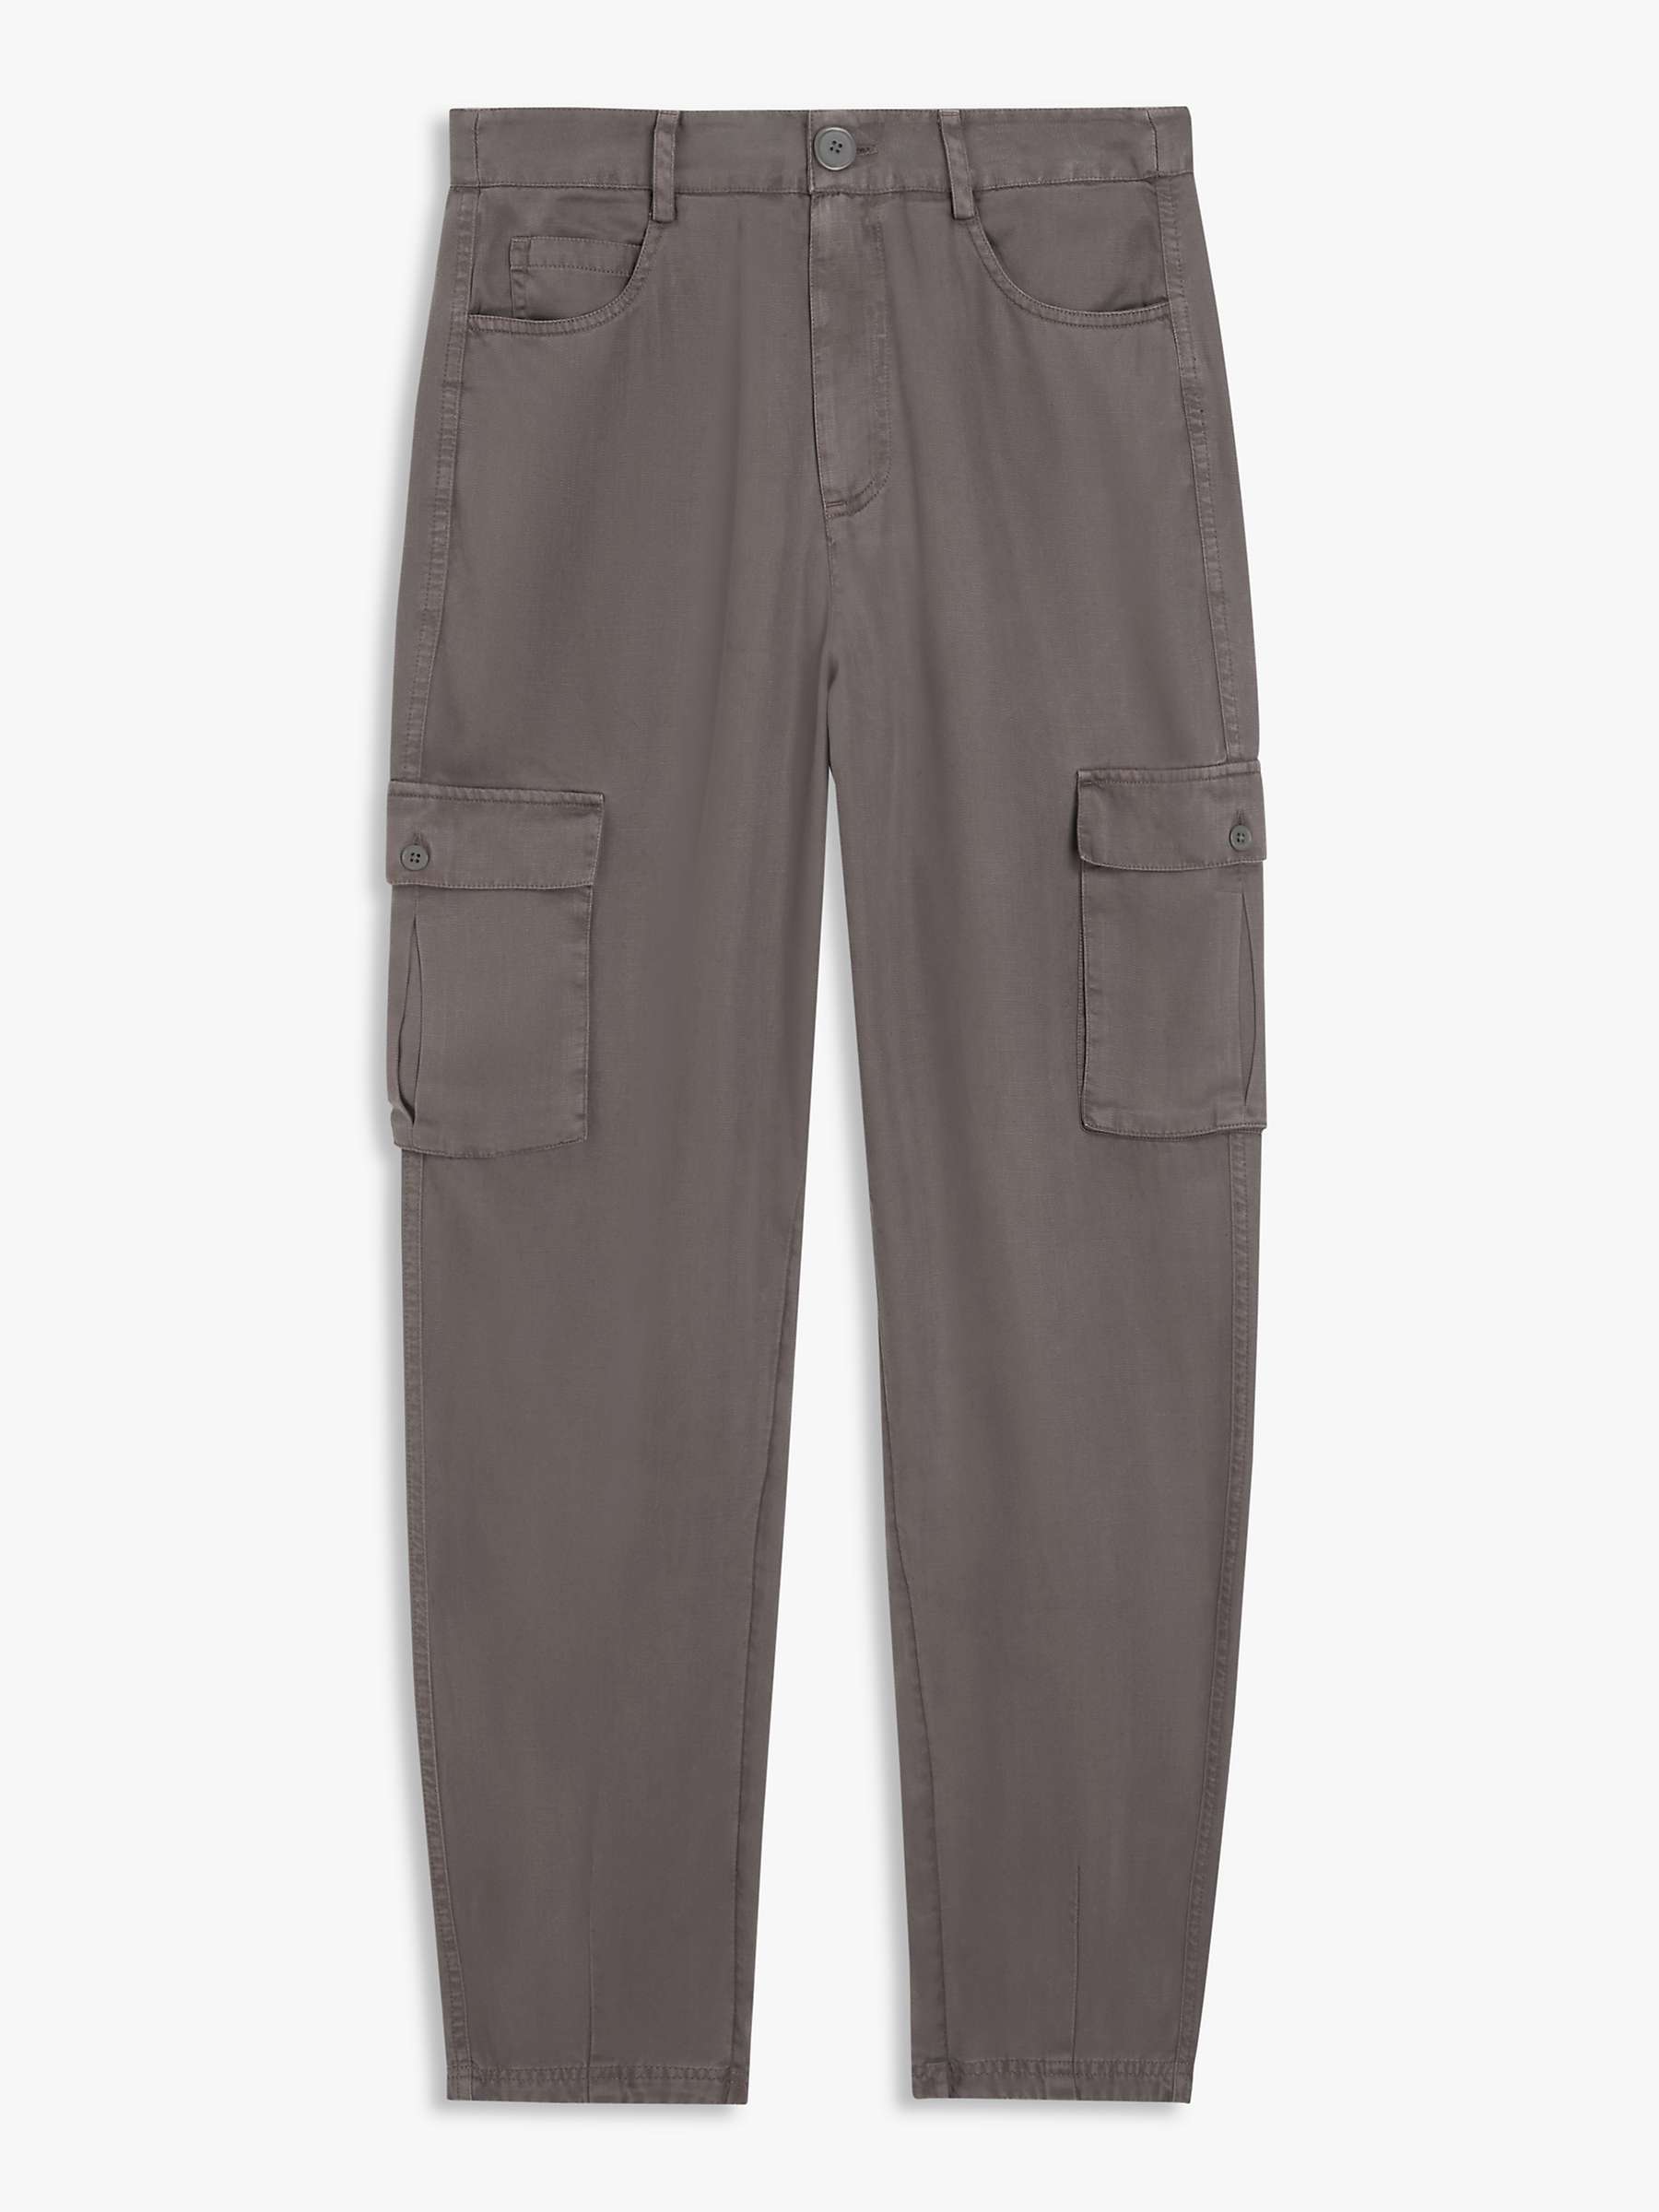 Buy John Lewis ANYDAY BalloonCargo Trousers Online at johnlewis.com